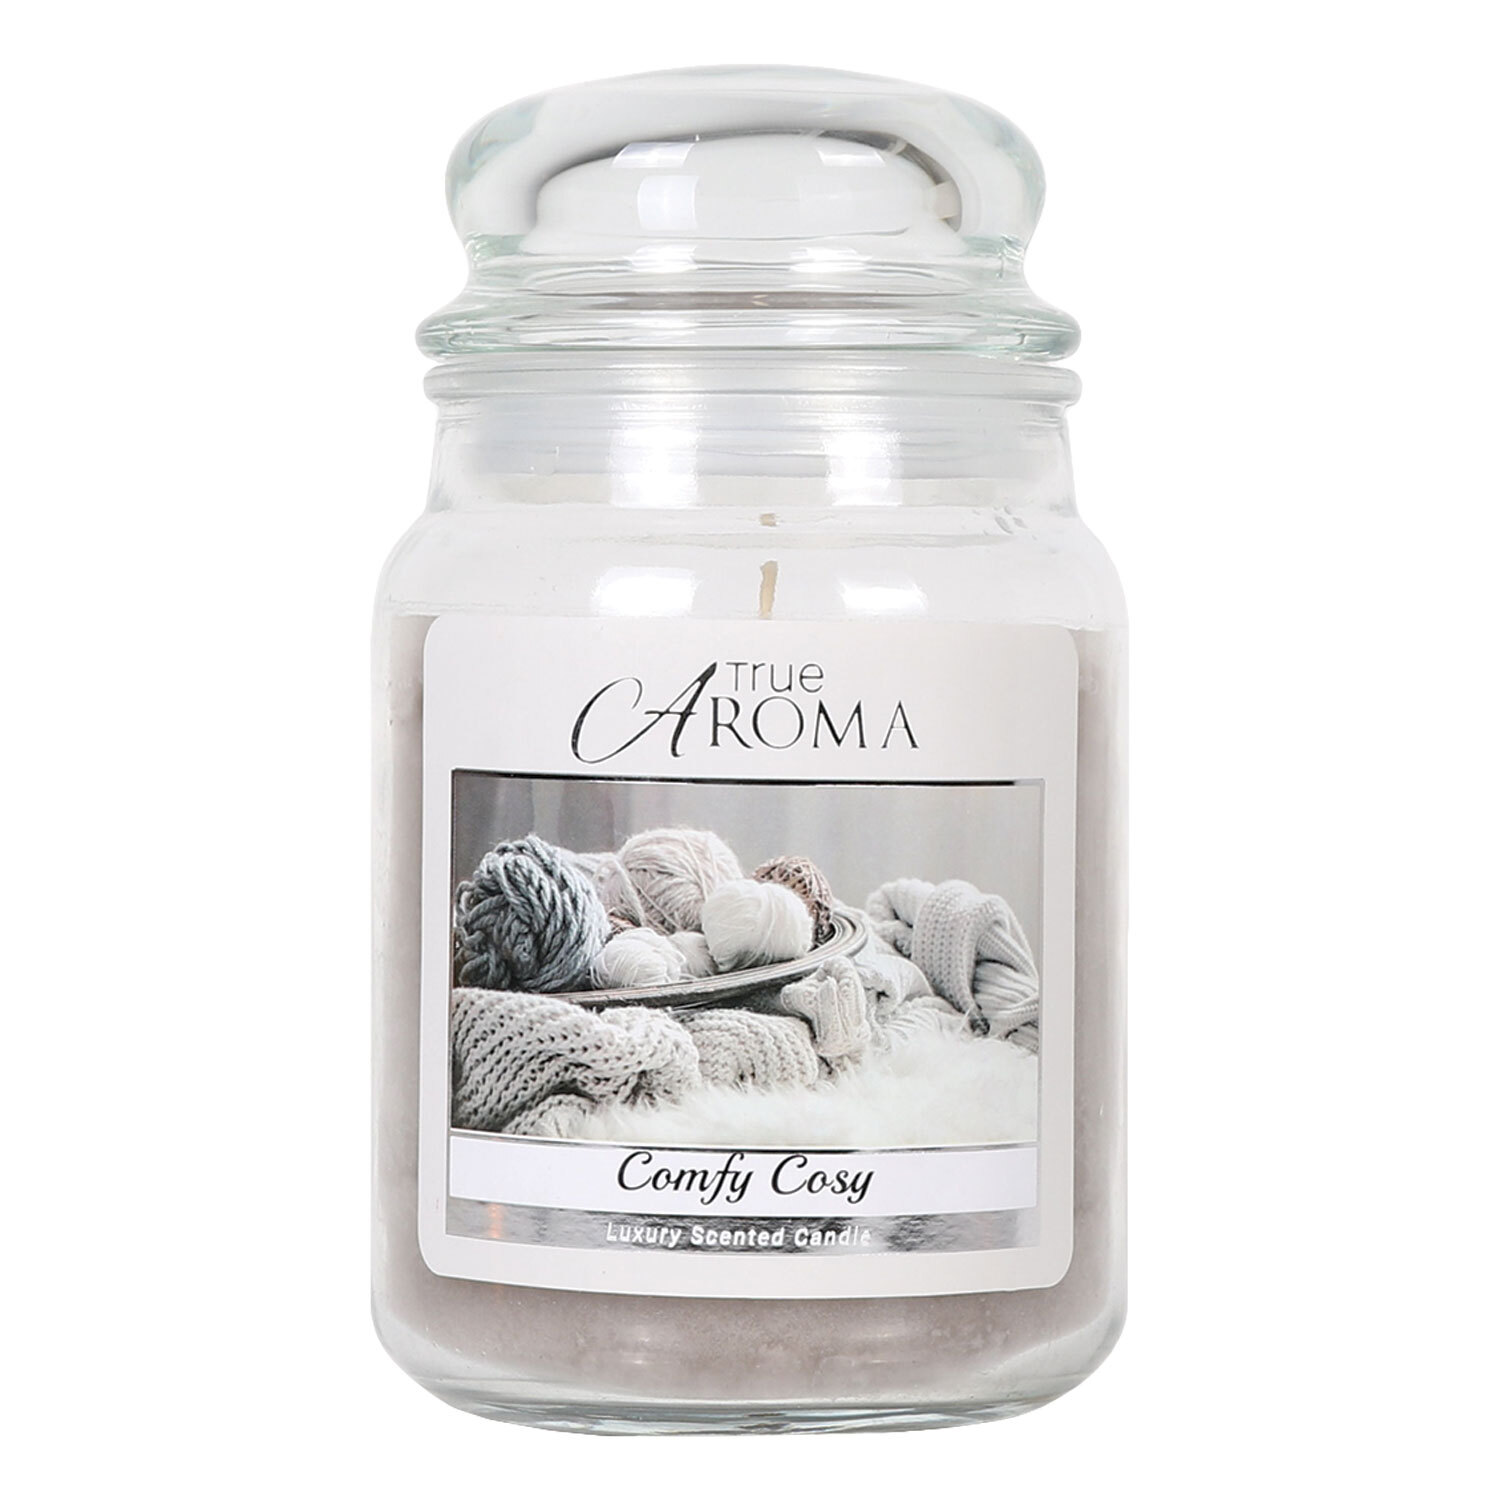 True Aroma Comfy Cosy Large Mason Jar Luxury Scented Candle Image